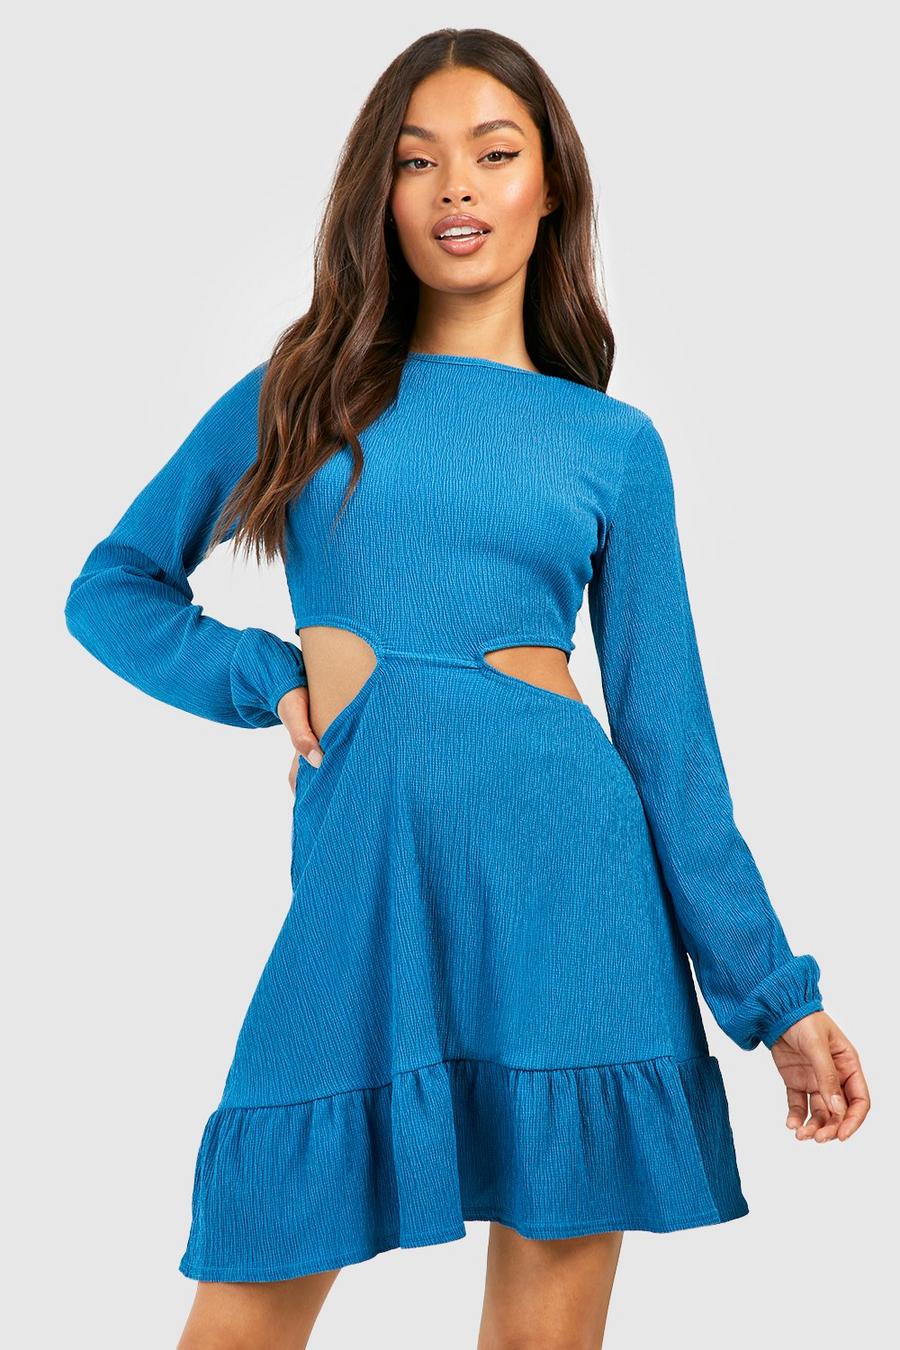 Turquoise Textured Cut Out Smock Dress